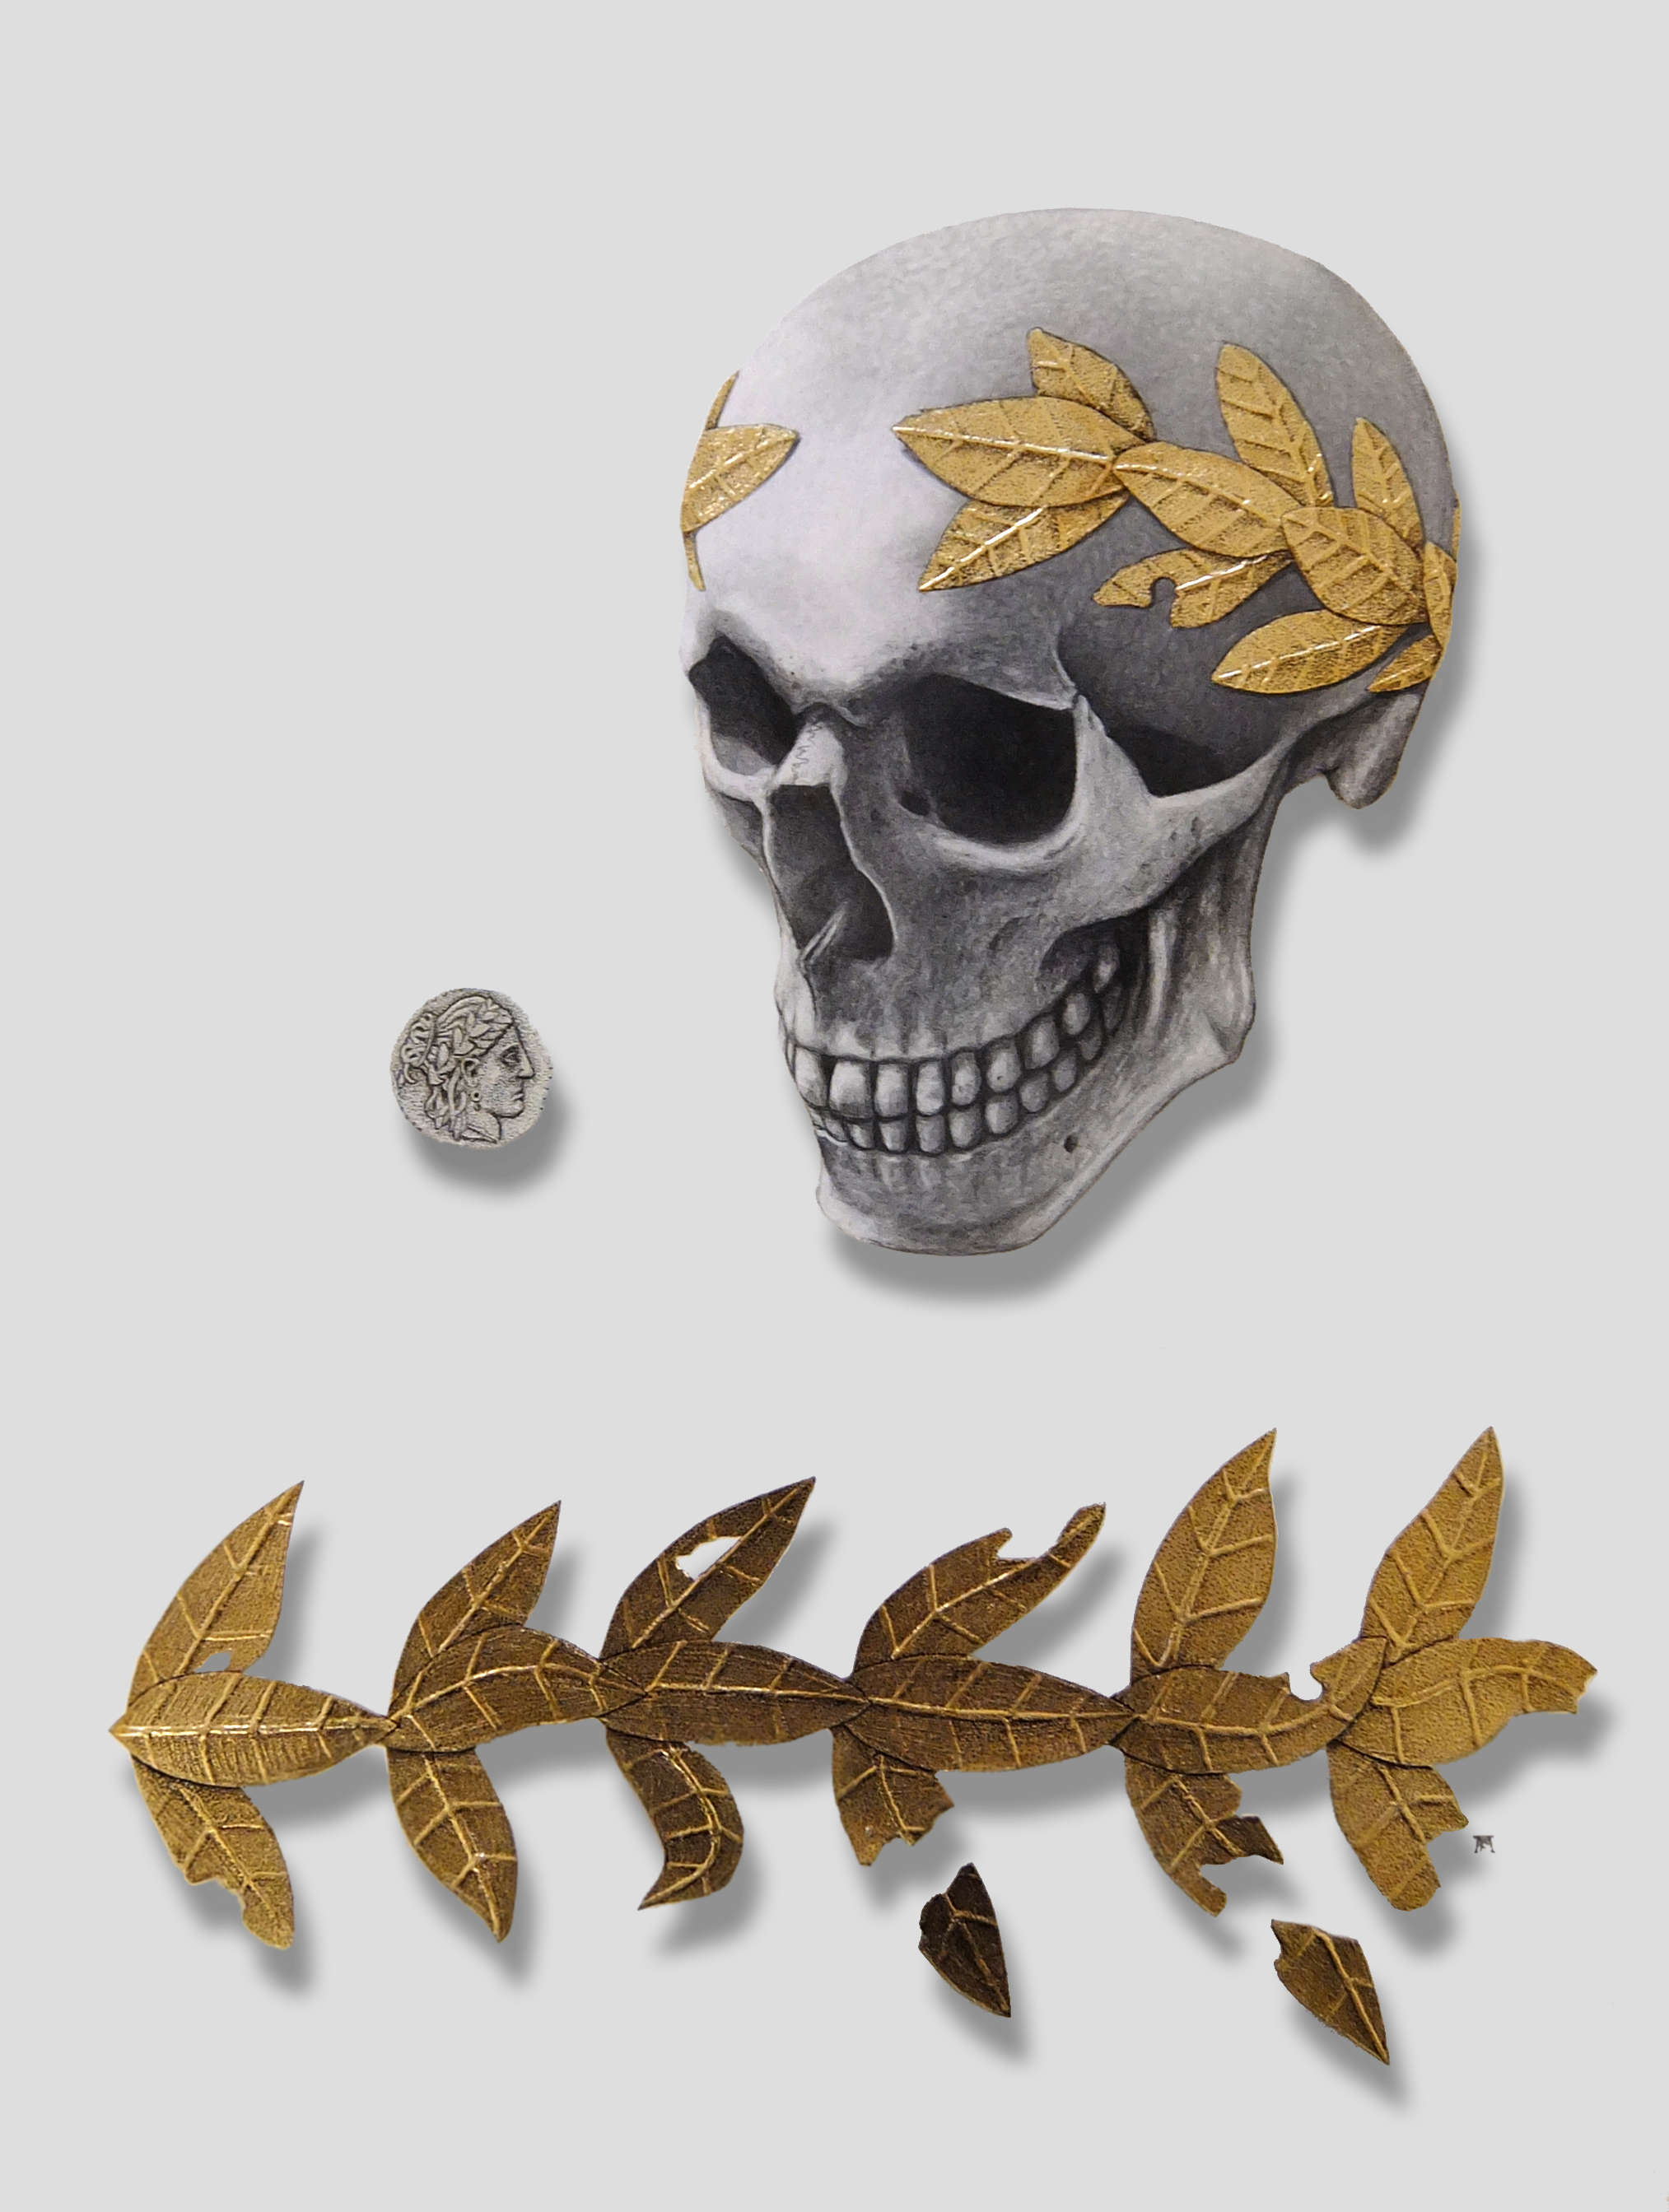 'Skull with Golden Wreath and Coin'